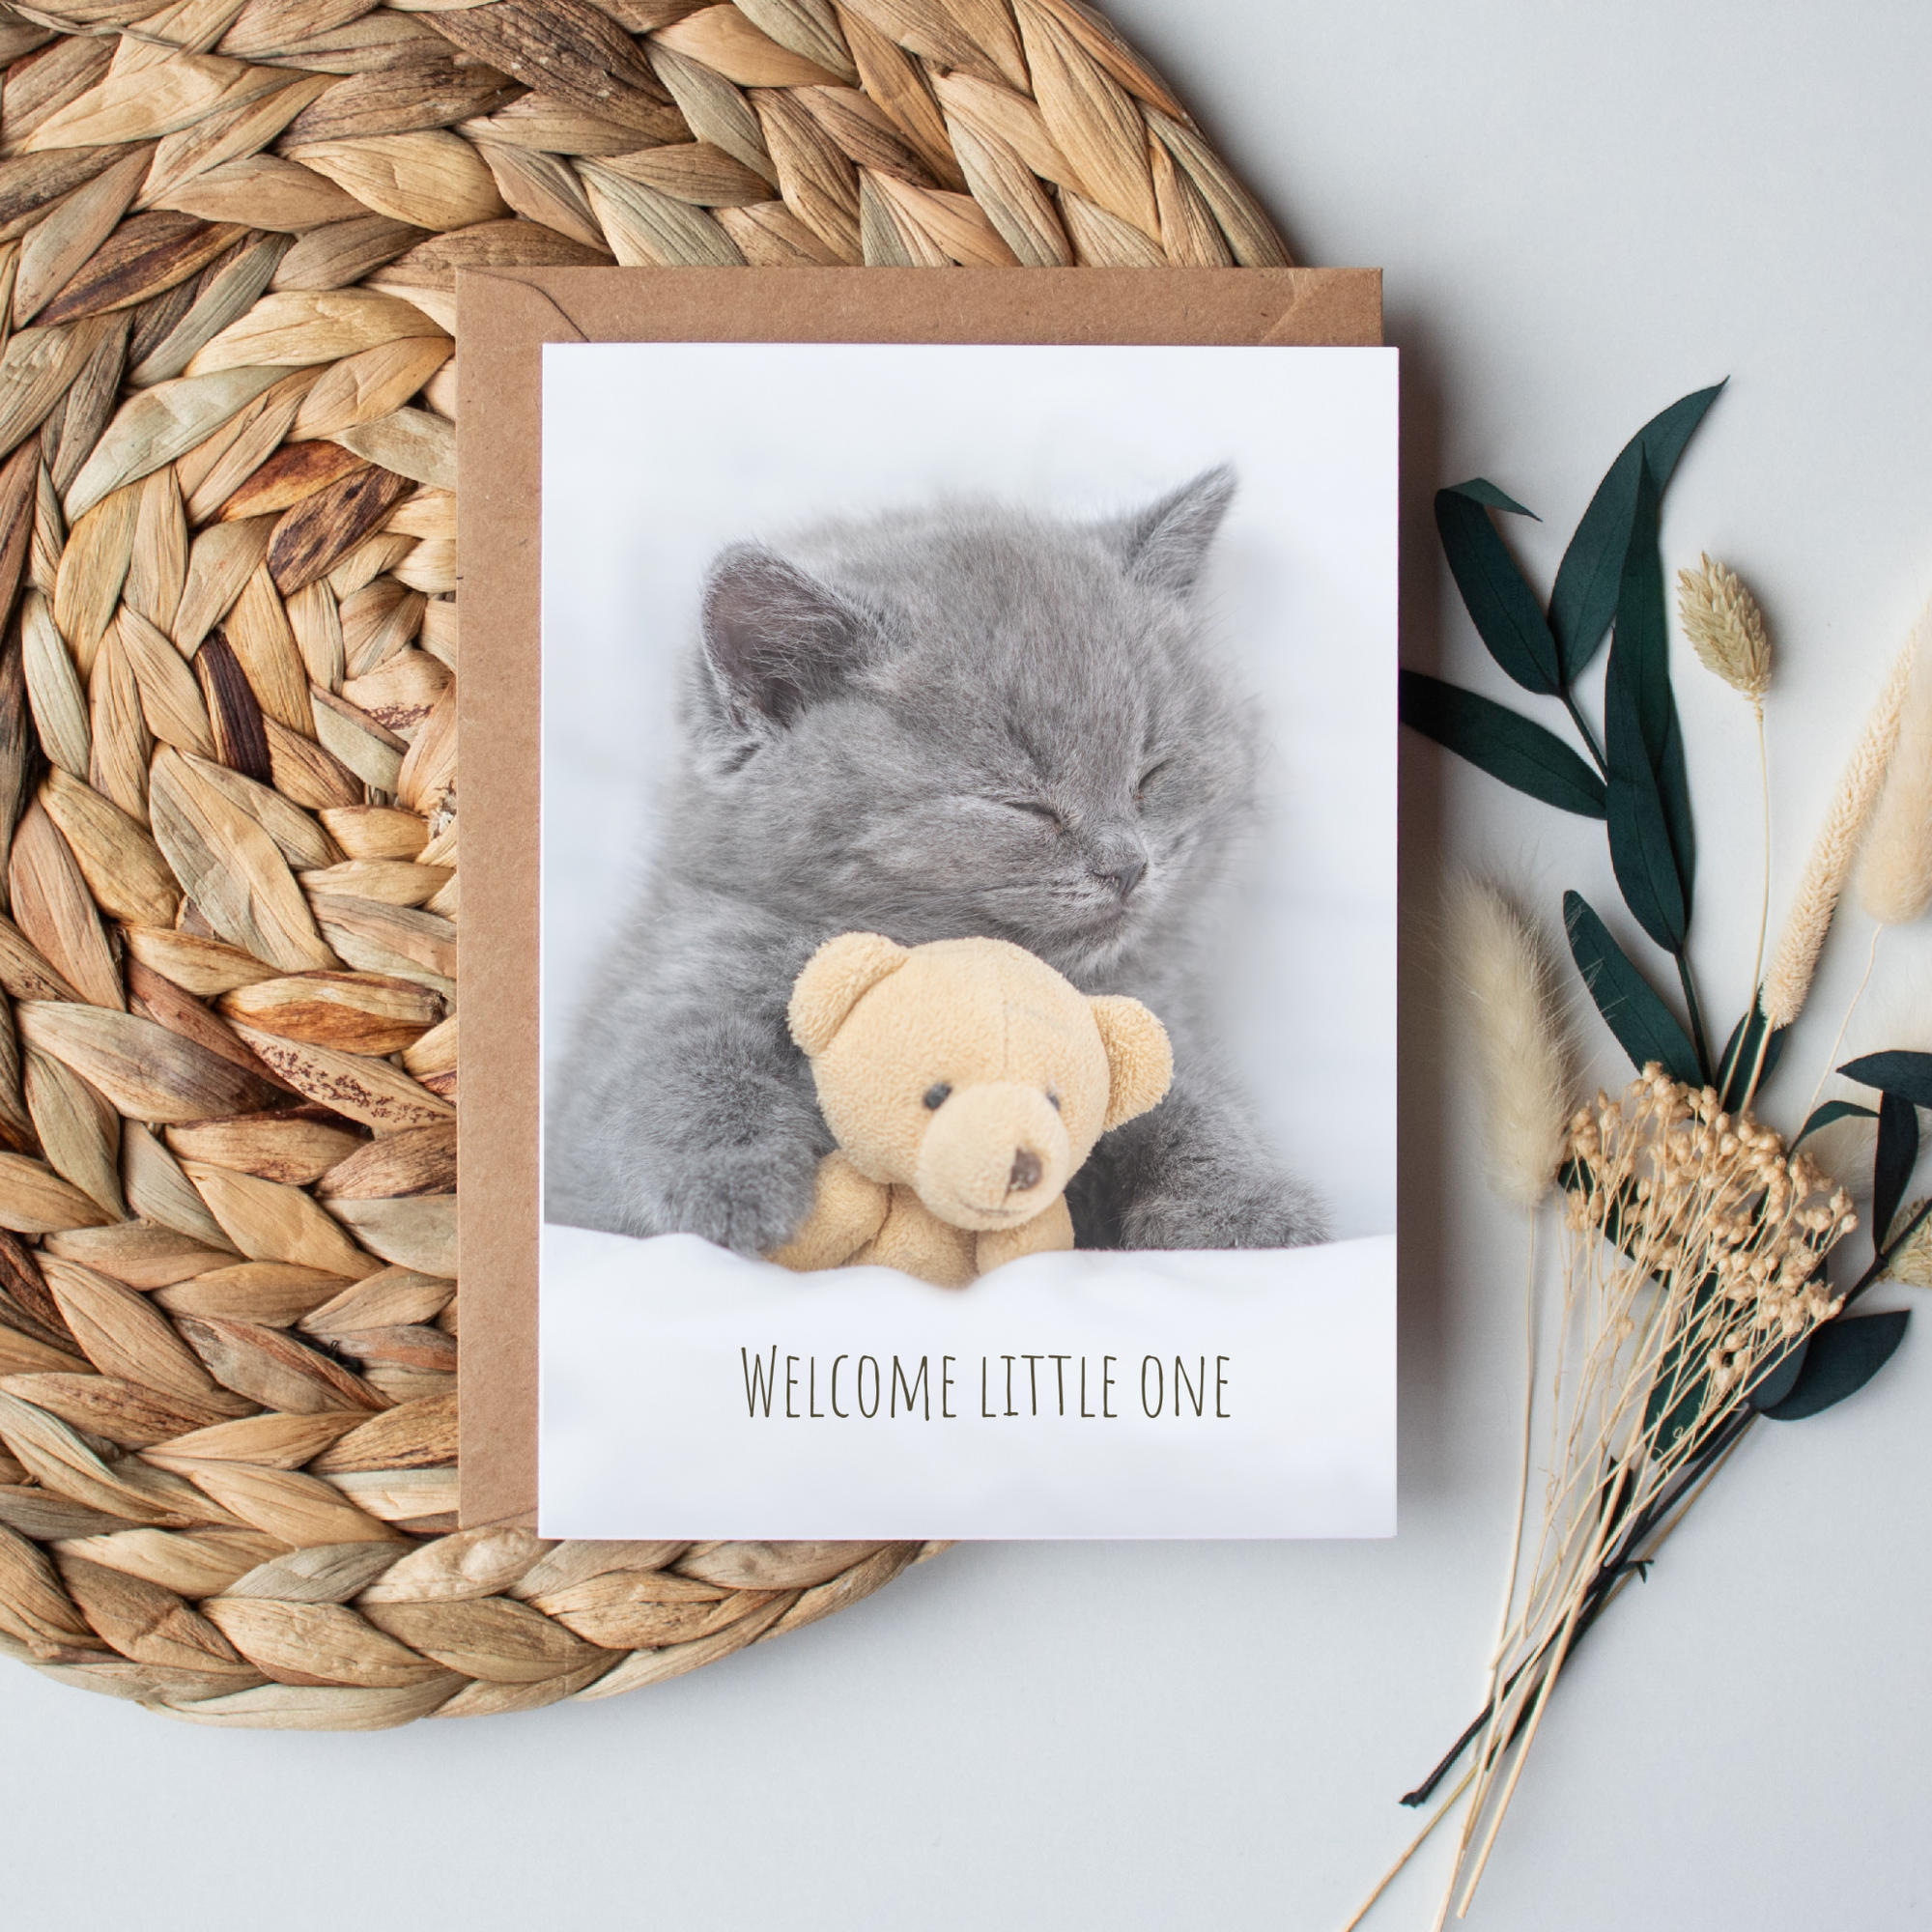 Little One Cat Greeting Card